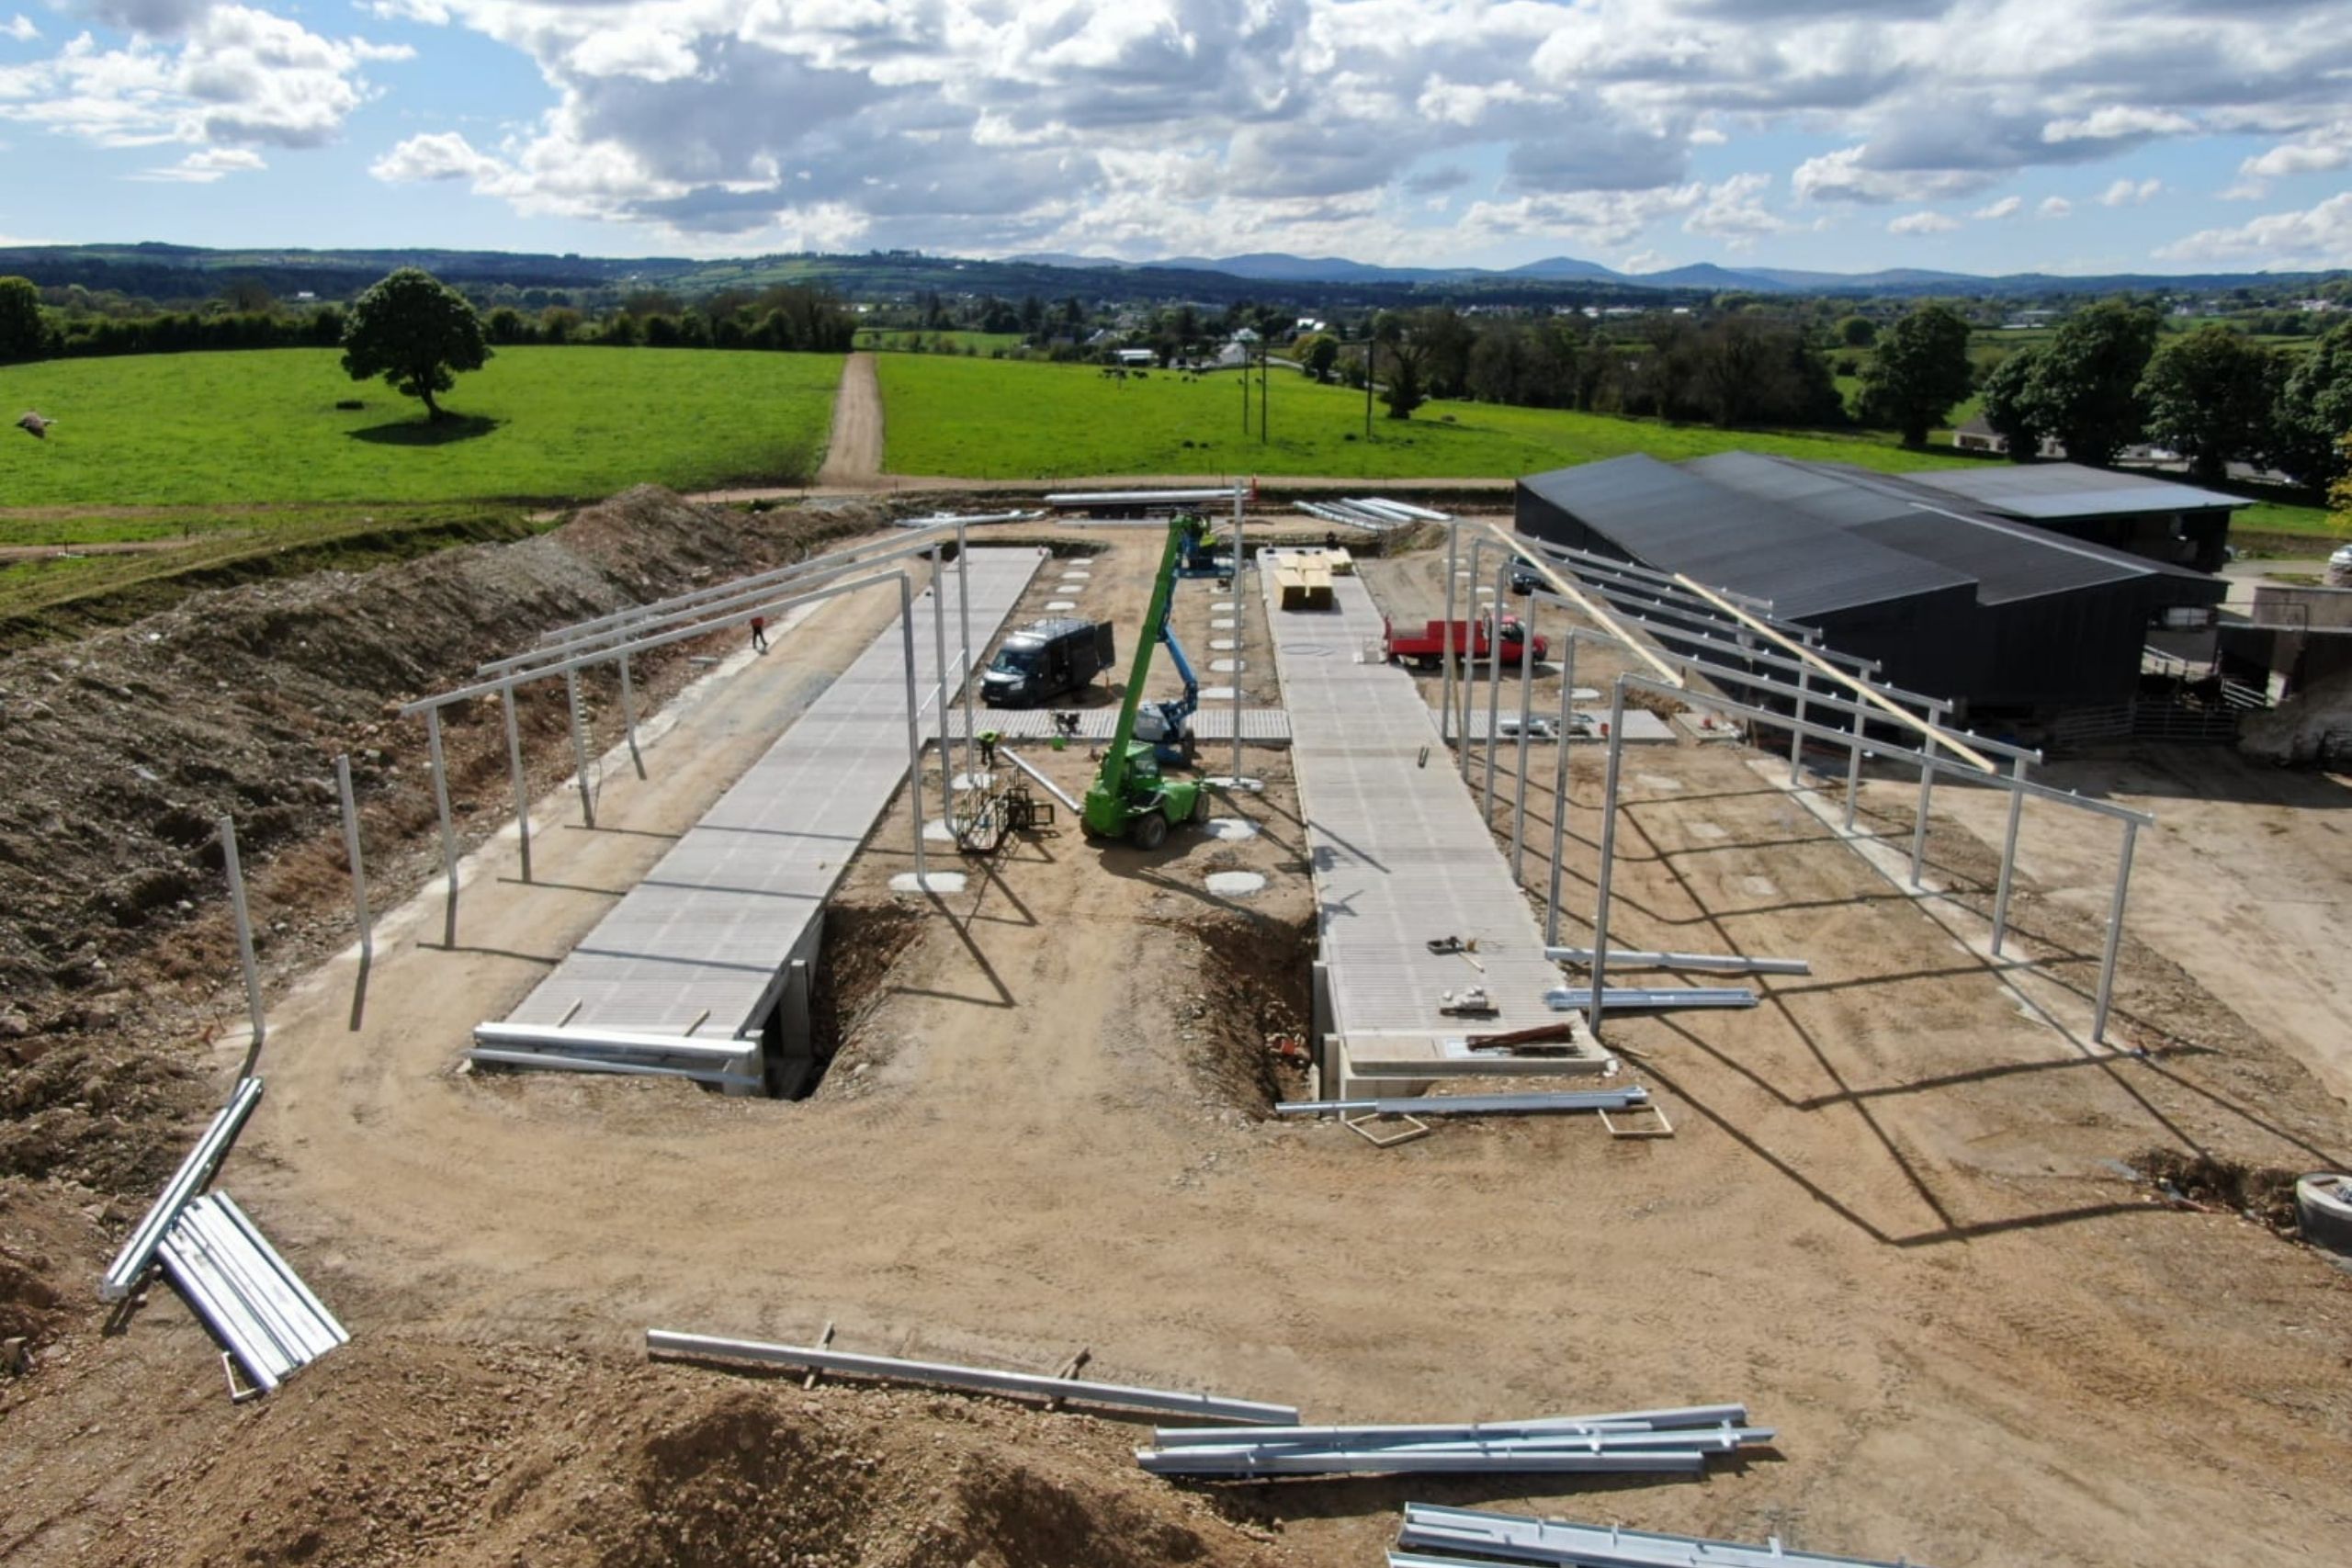 Erection of structural steel and cladding for an agricultural shed